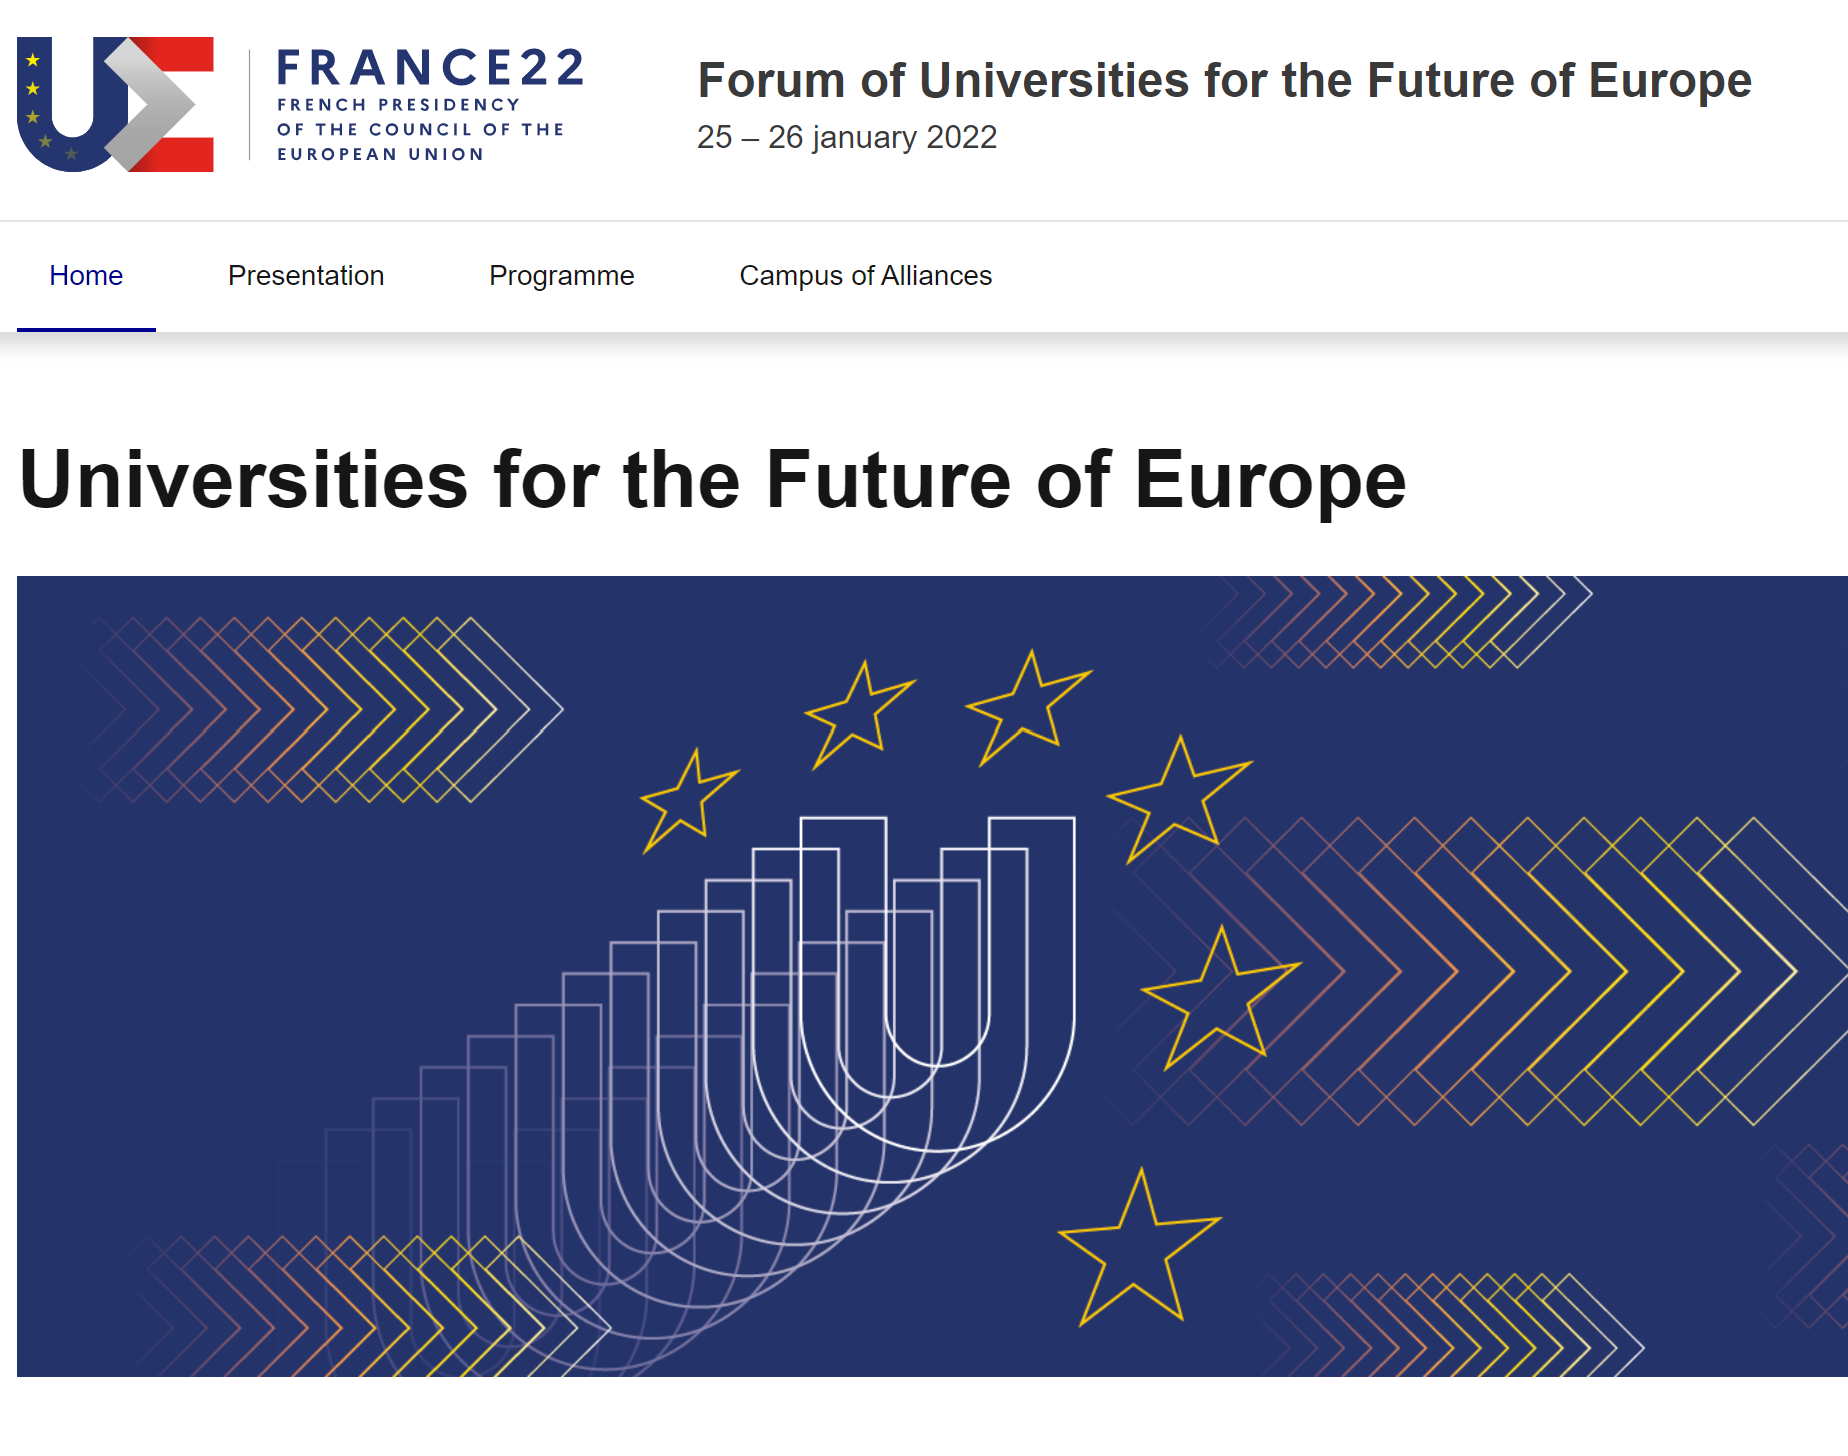 Forum of Universities for the Future of Europe